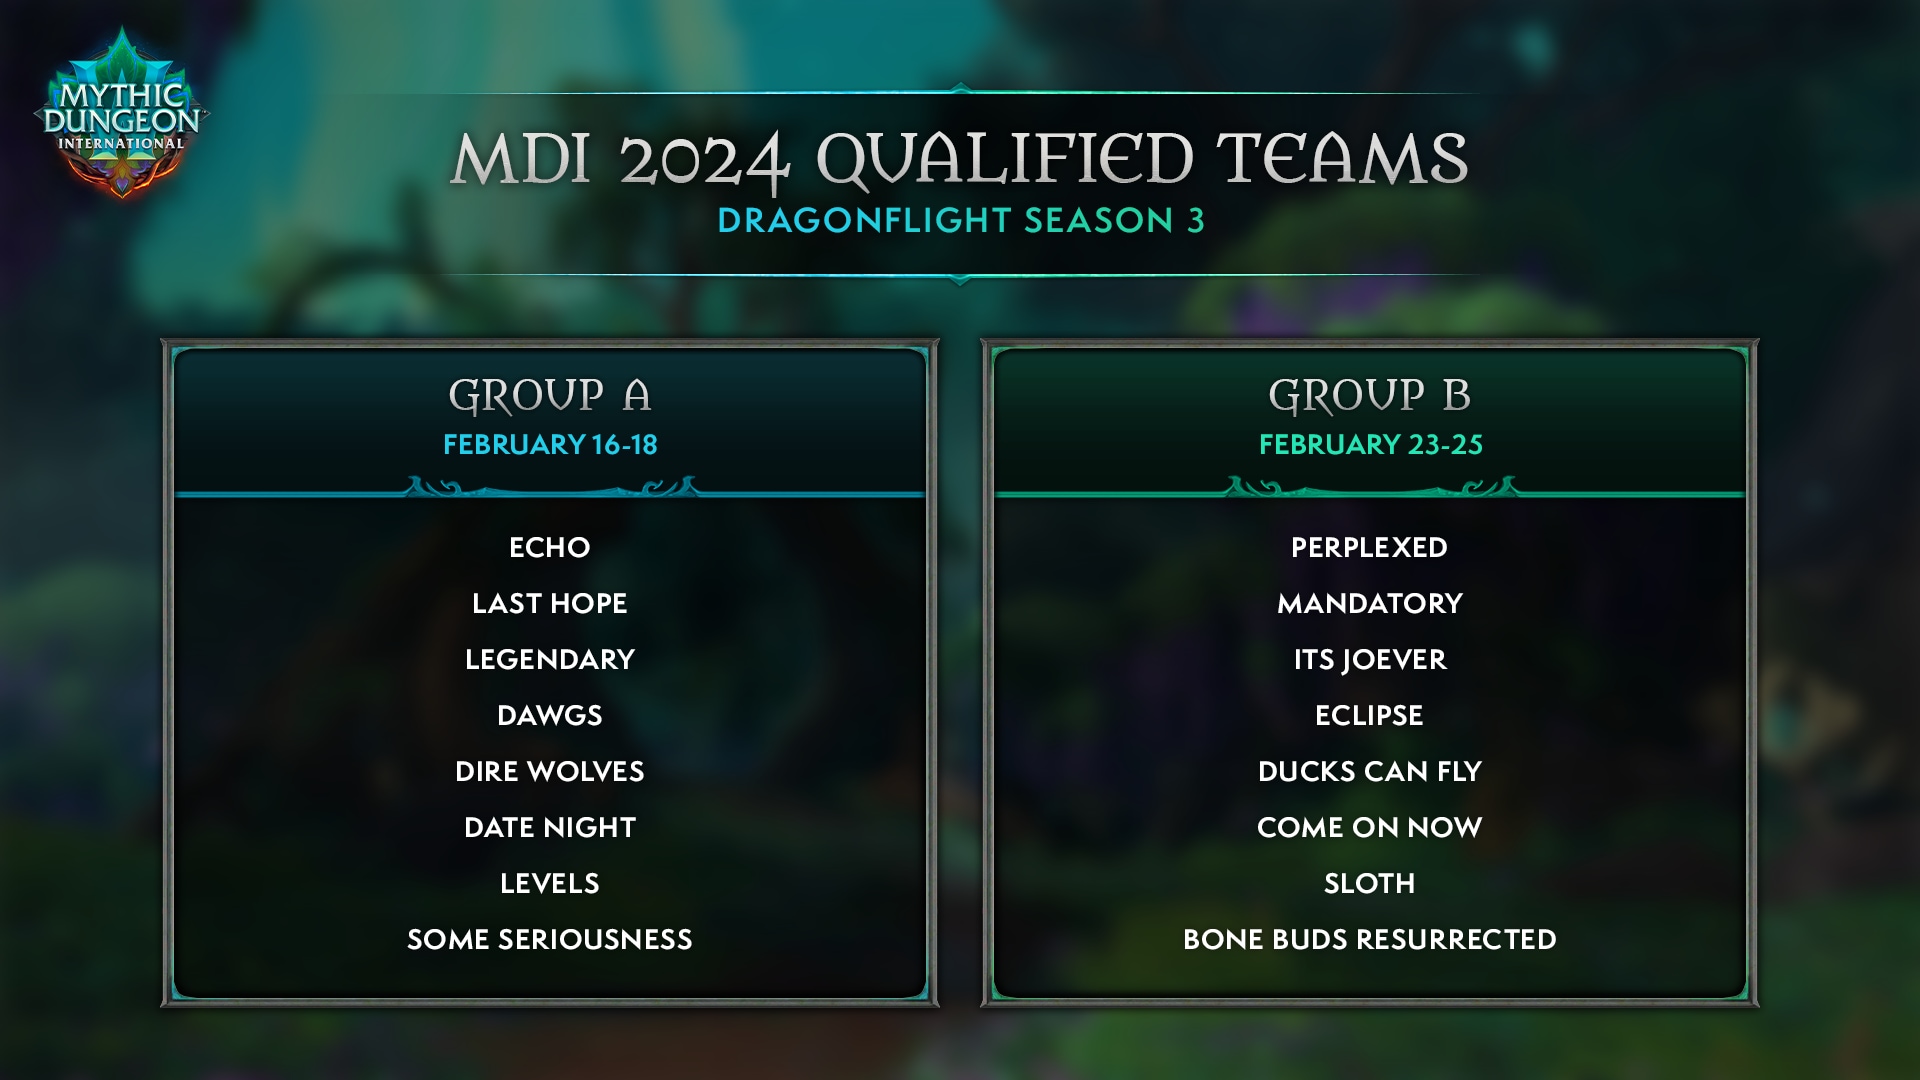 WoW_10.2_MDI_S3_TeamsTemplate_24Team_1920x1080.png